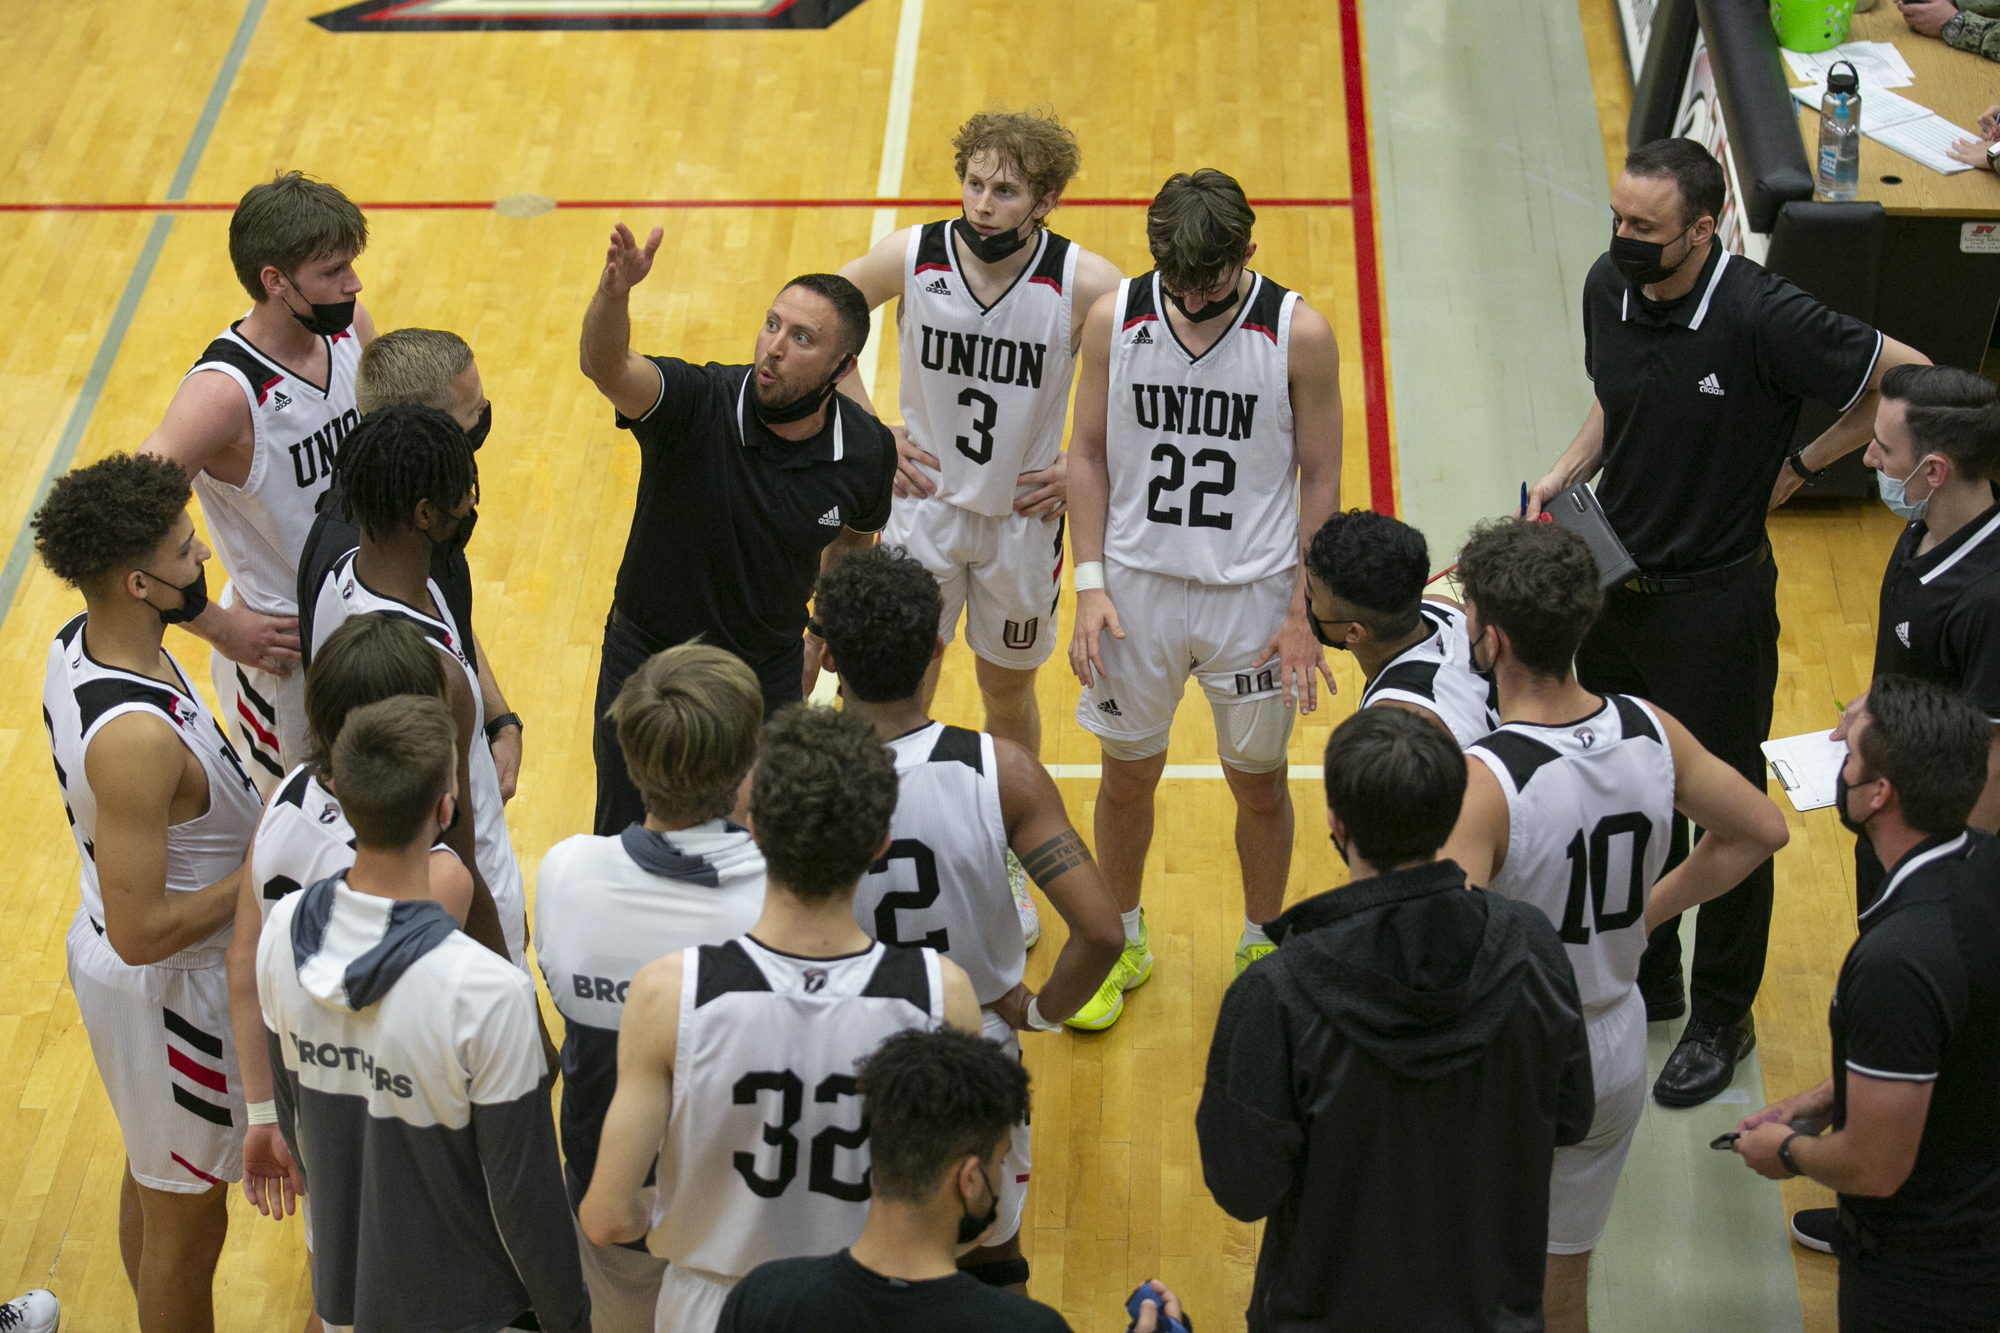 Union's head coach Blake Conley talks to his team during a timeout during the 4A/3A GSHL boys basketball playoff game at Union High School on Thursday, June 3, 2021.